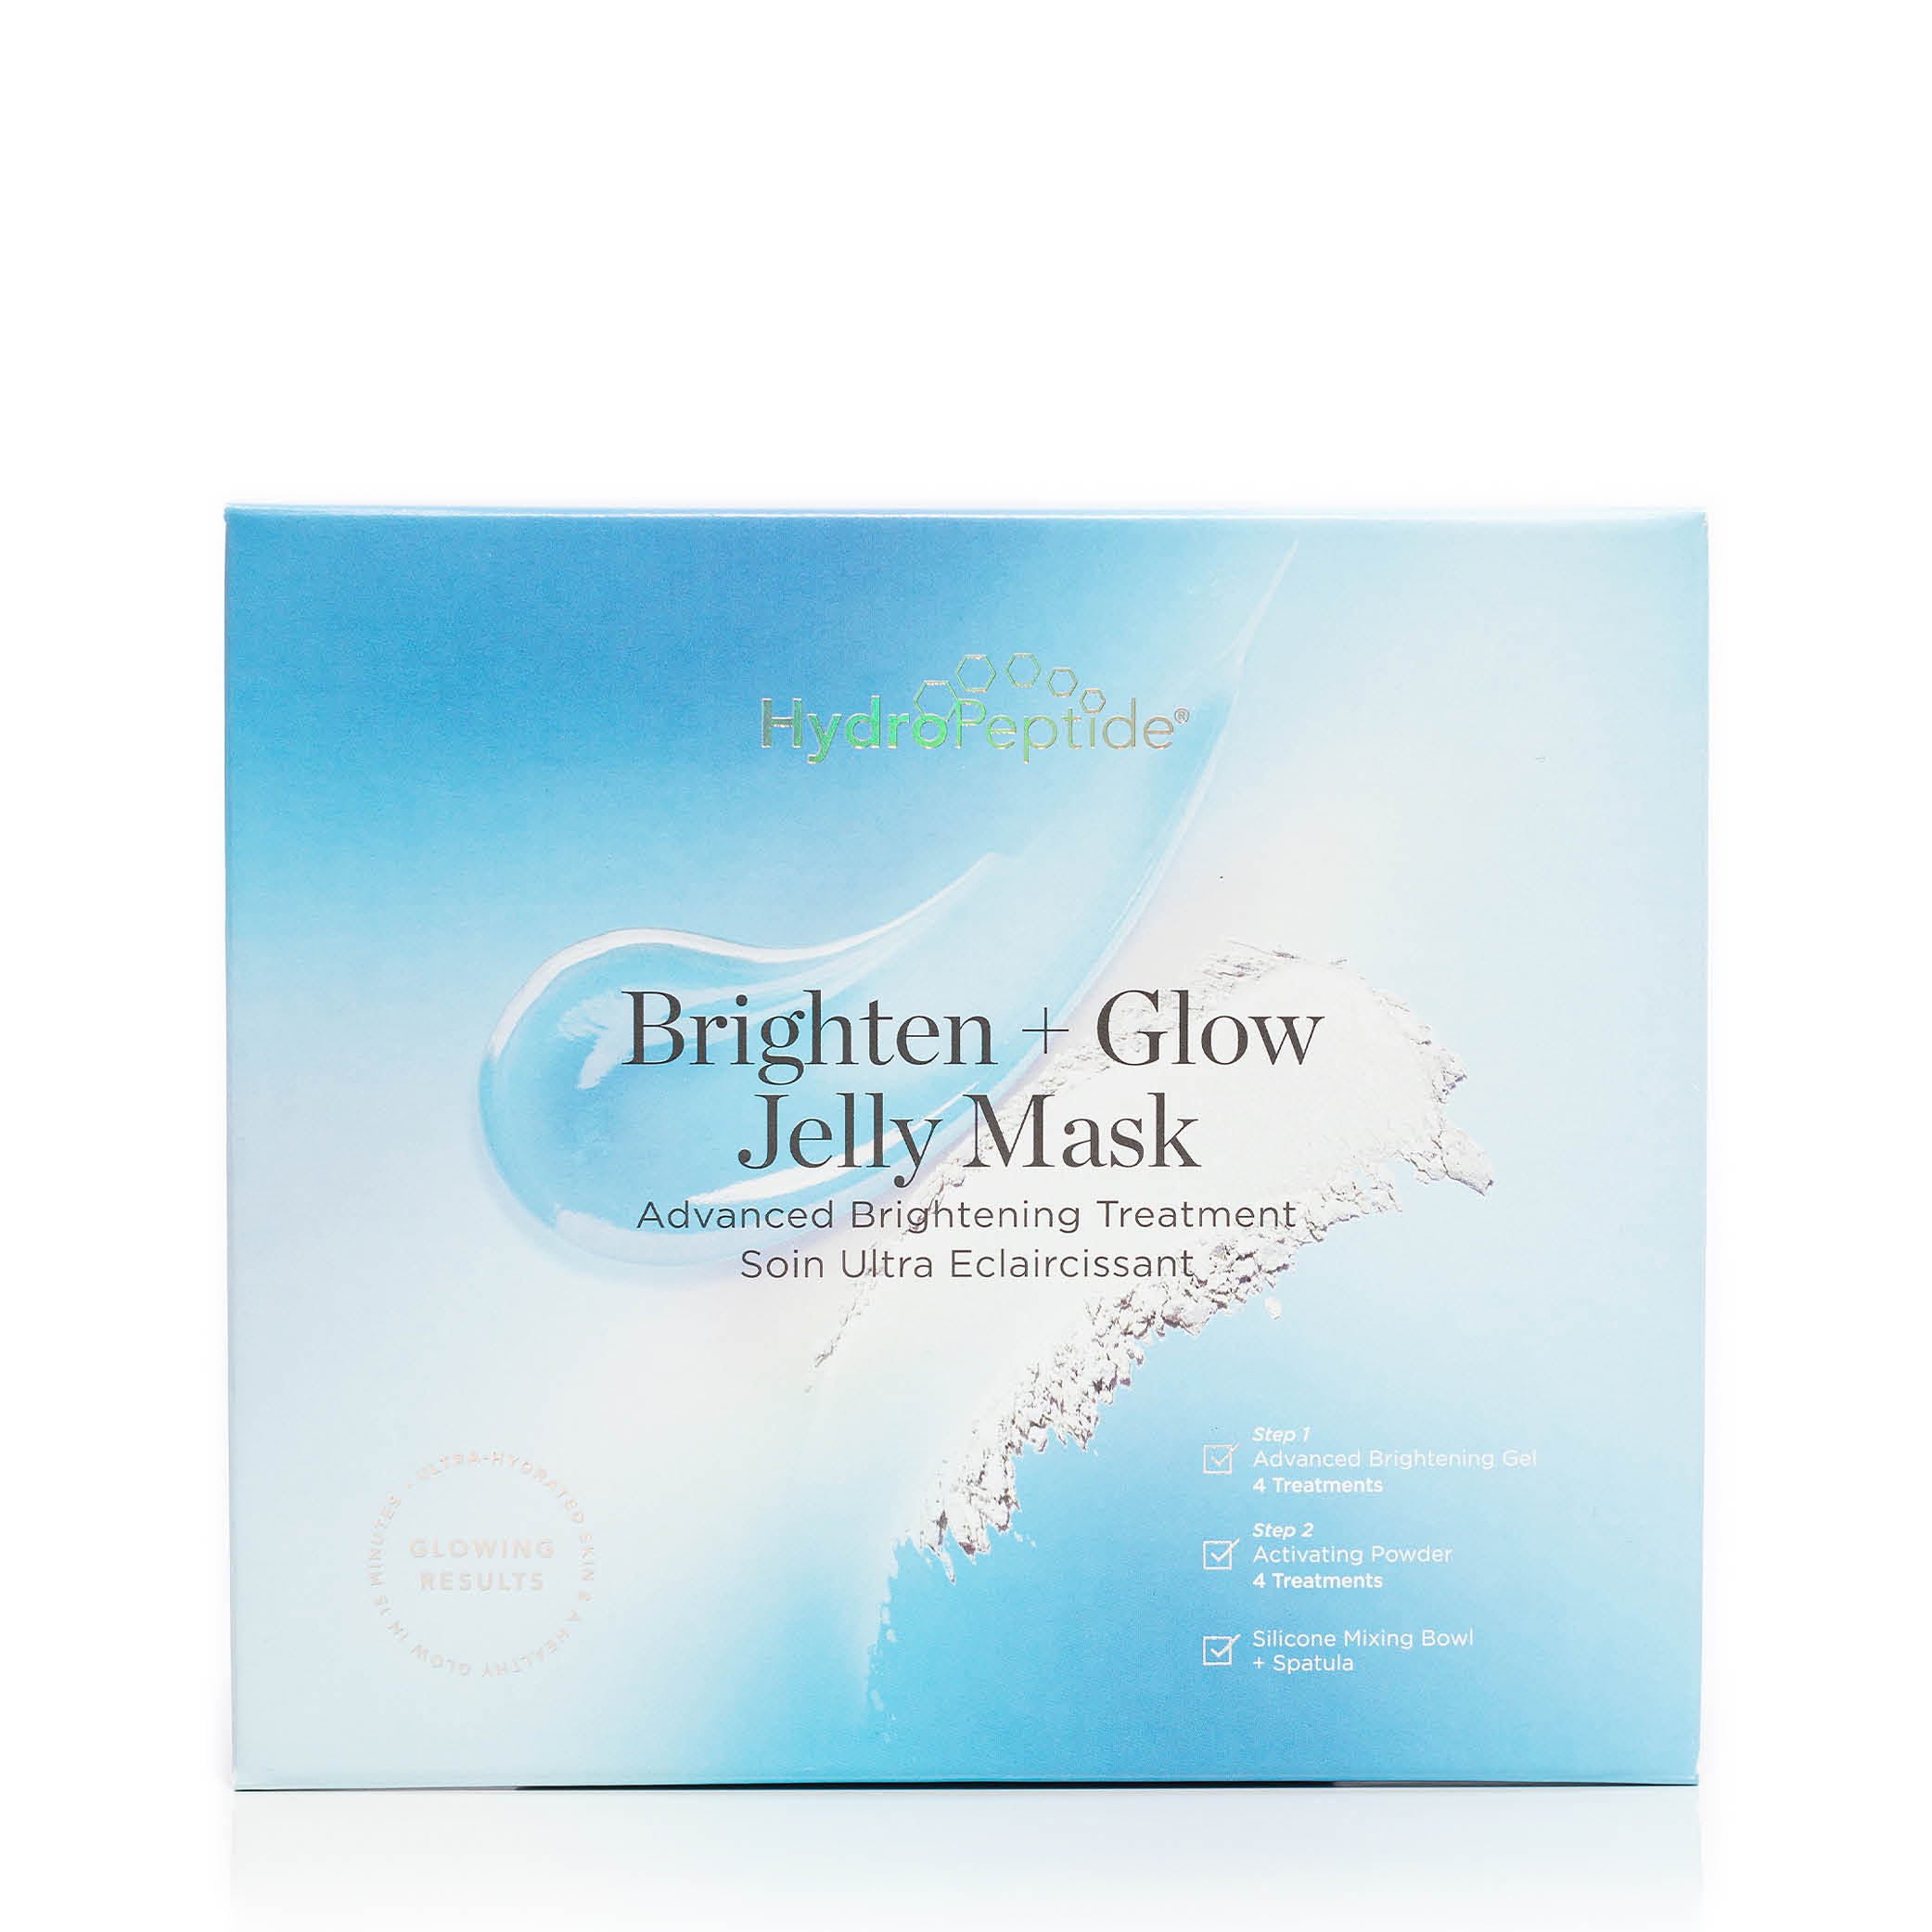 Brighten & Glow Jelly Mask - Soin ultra éclaircissant